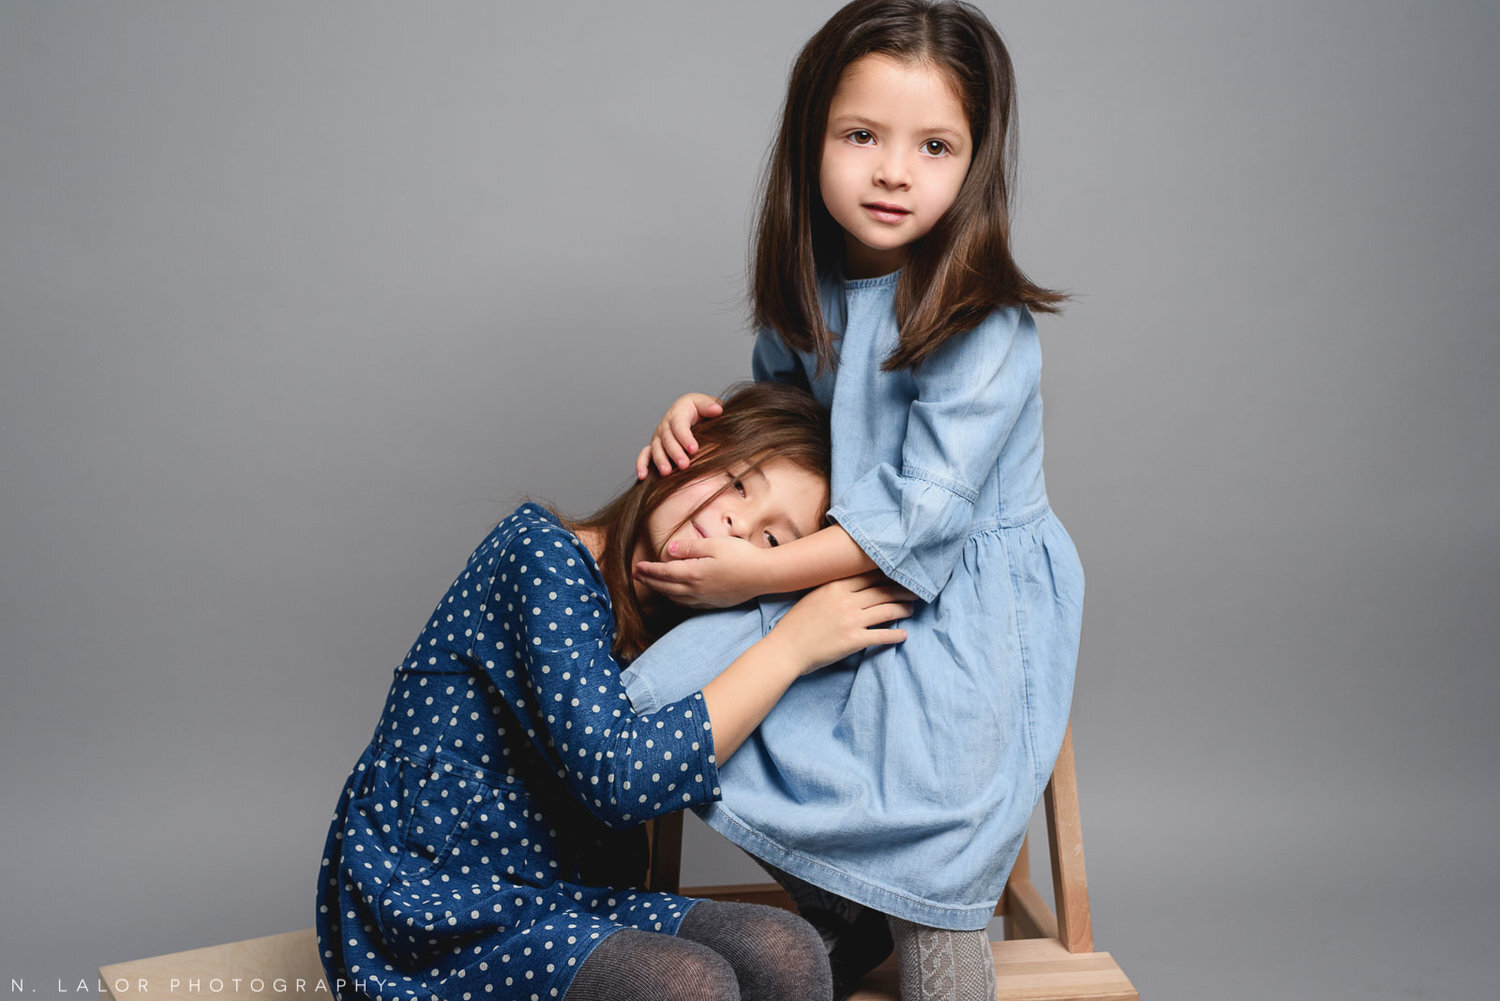 nlalor-photography-2016-12-13-studio-family-two-girls-greenwich-connecticut-8.jpg